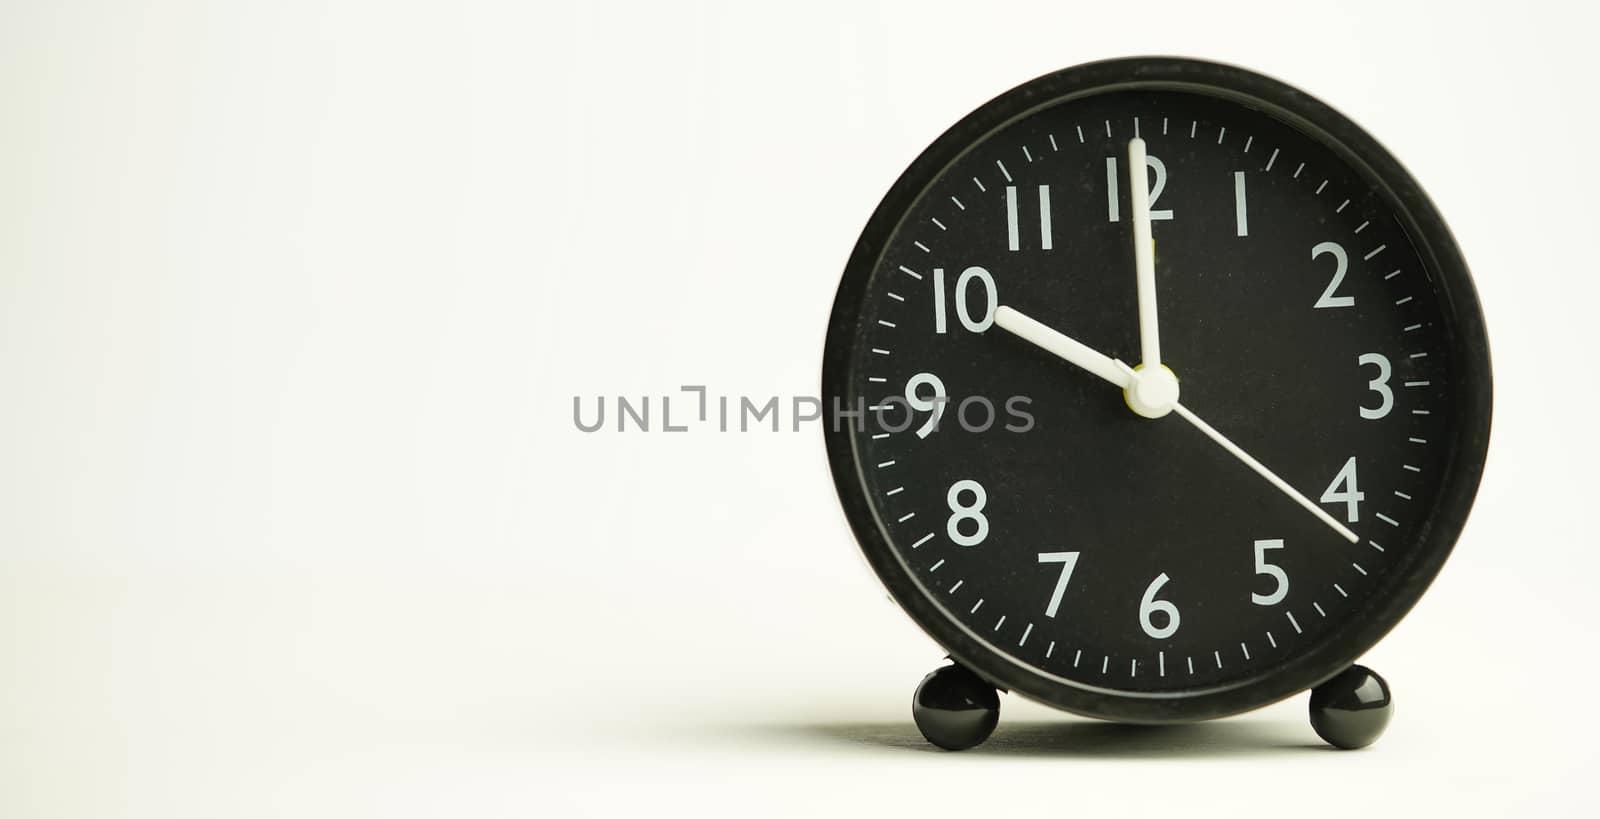 Decorative close-up black analog alarm clock for 10 o'clock isol by noppha80